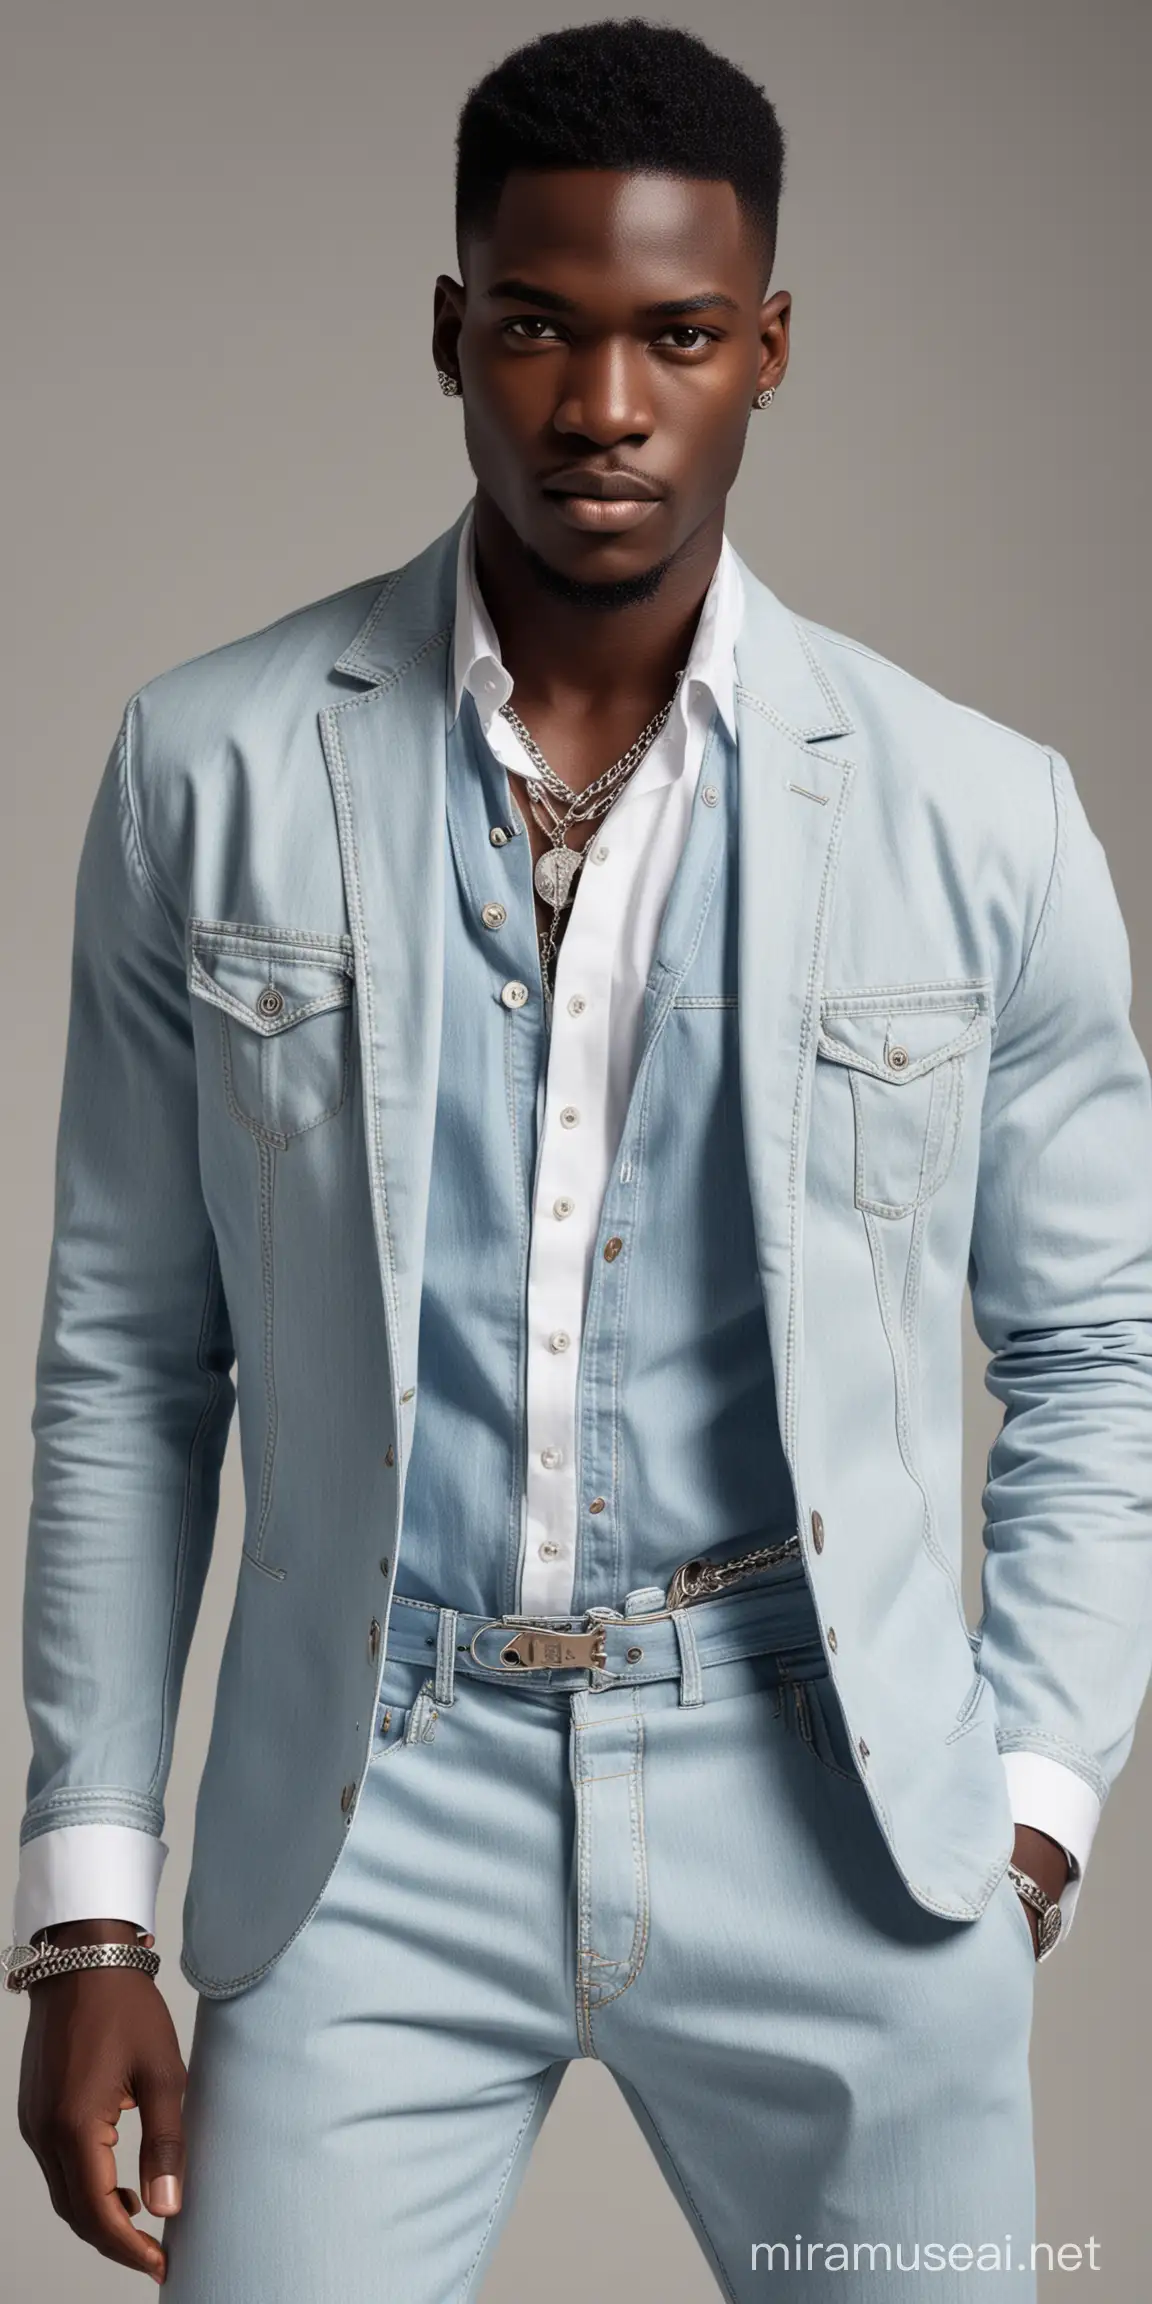 An African male model wearing a jean suit and white shirt. The suit has silver chain and buttons beautifully design. Masterpiece fashion design.